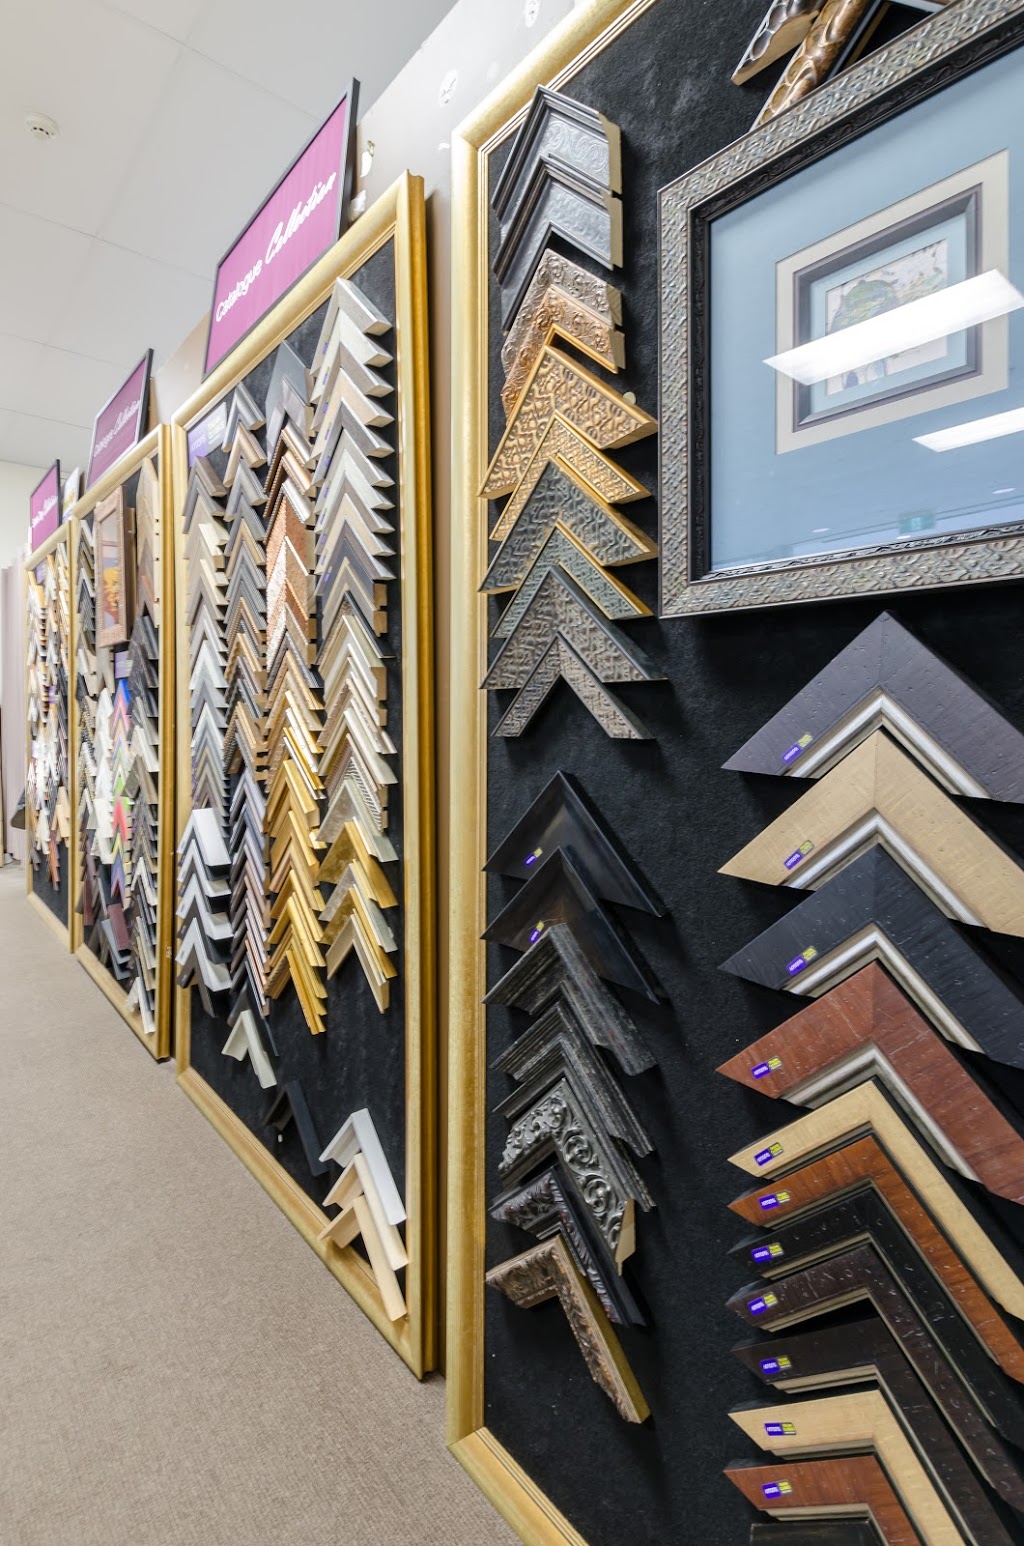 Frame Today Penrith | home goods store | 20/13 Pattys Pl, Penrith NSW 2750, Australia | 0247333380 OR +61 2 4733 3380